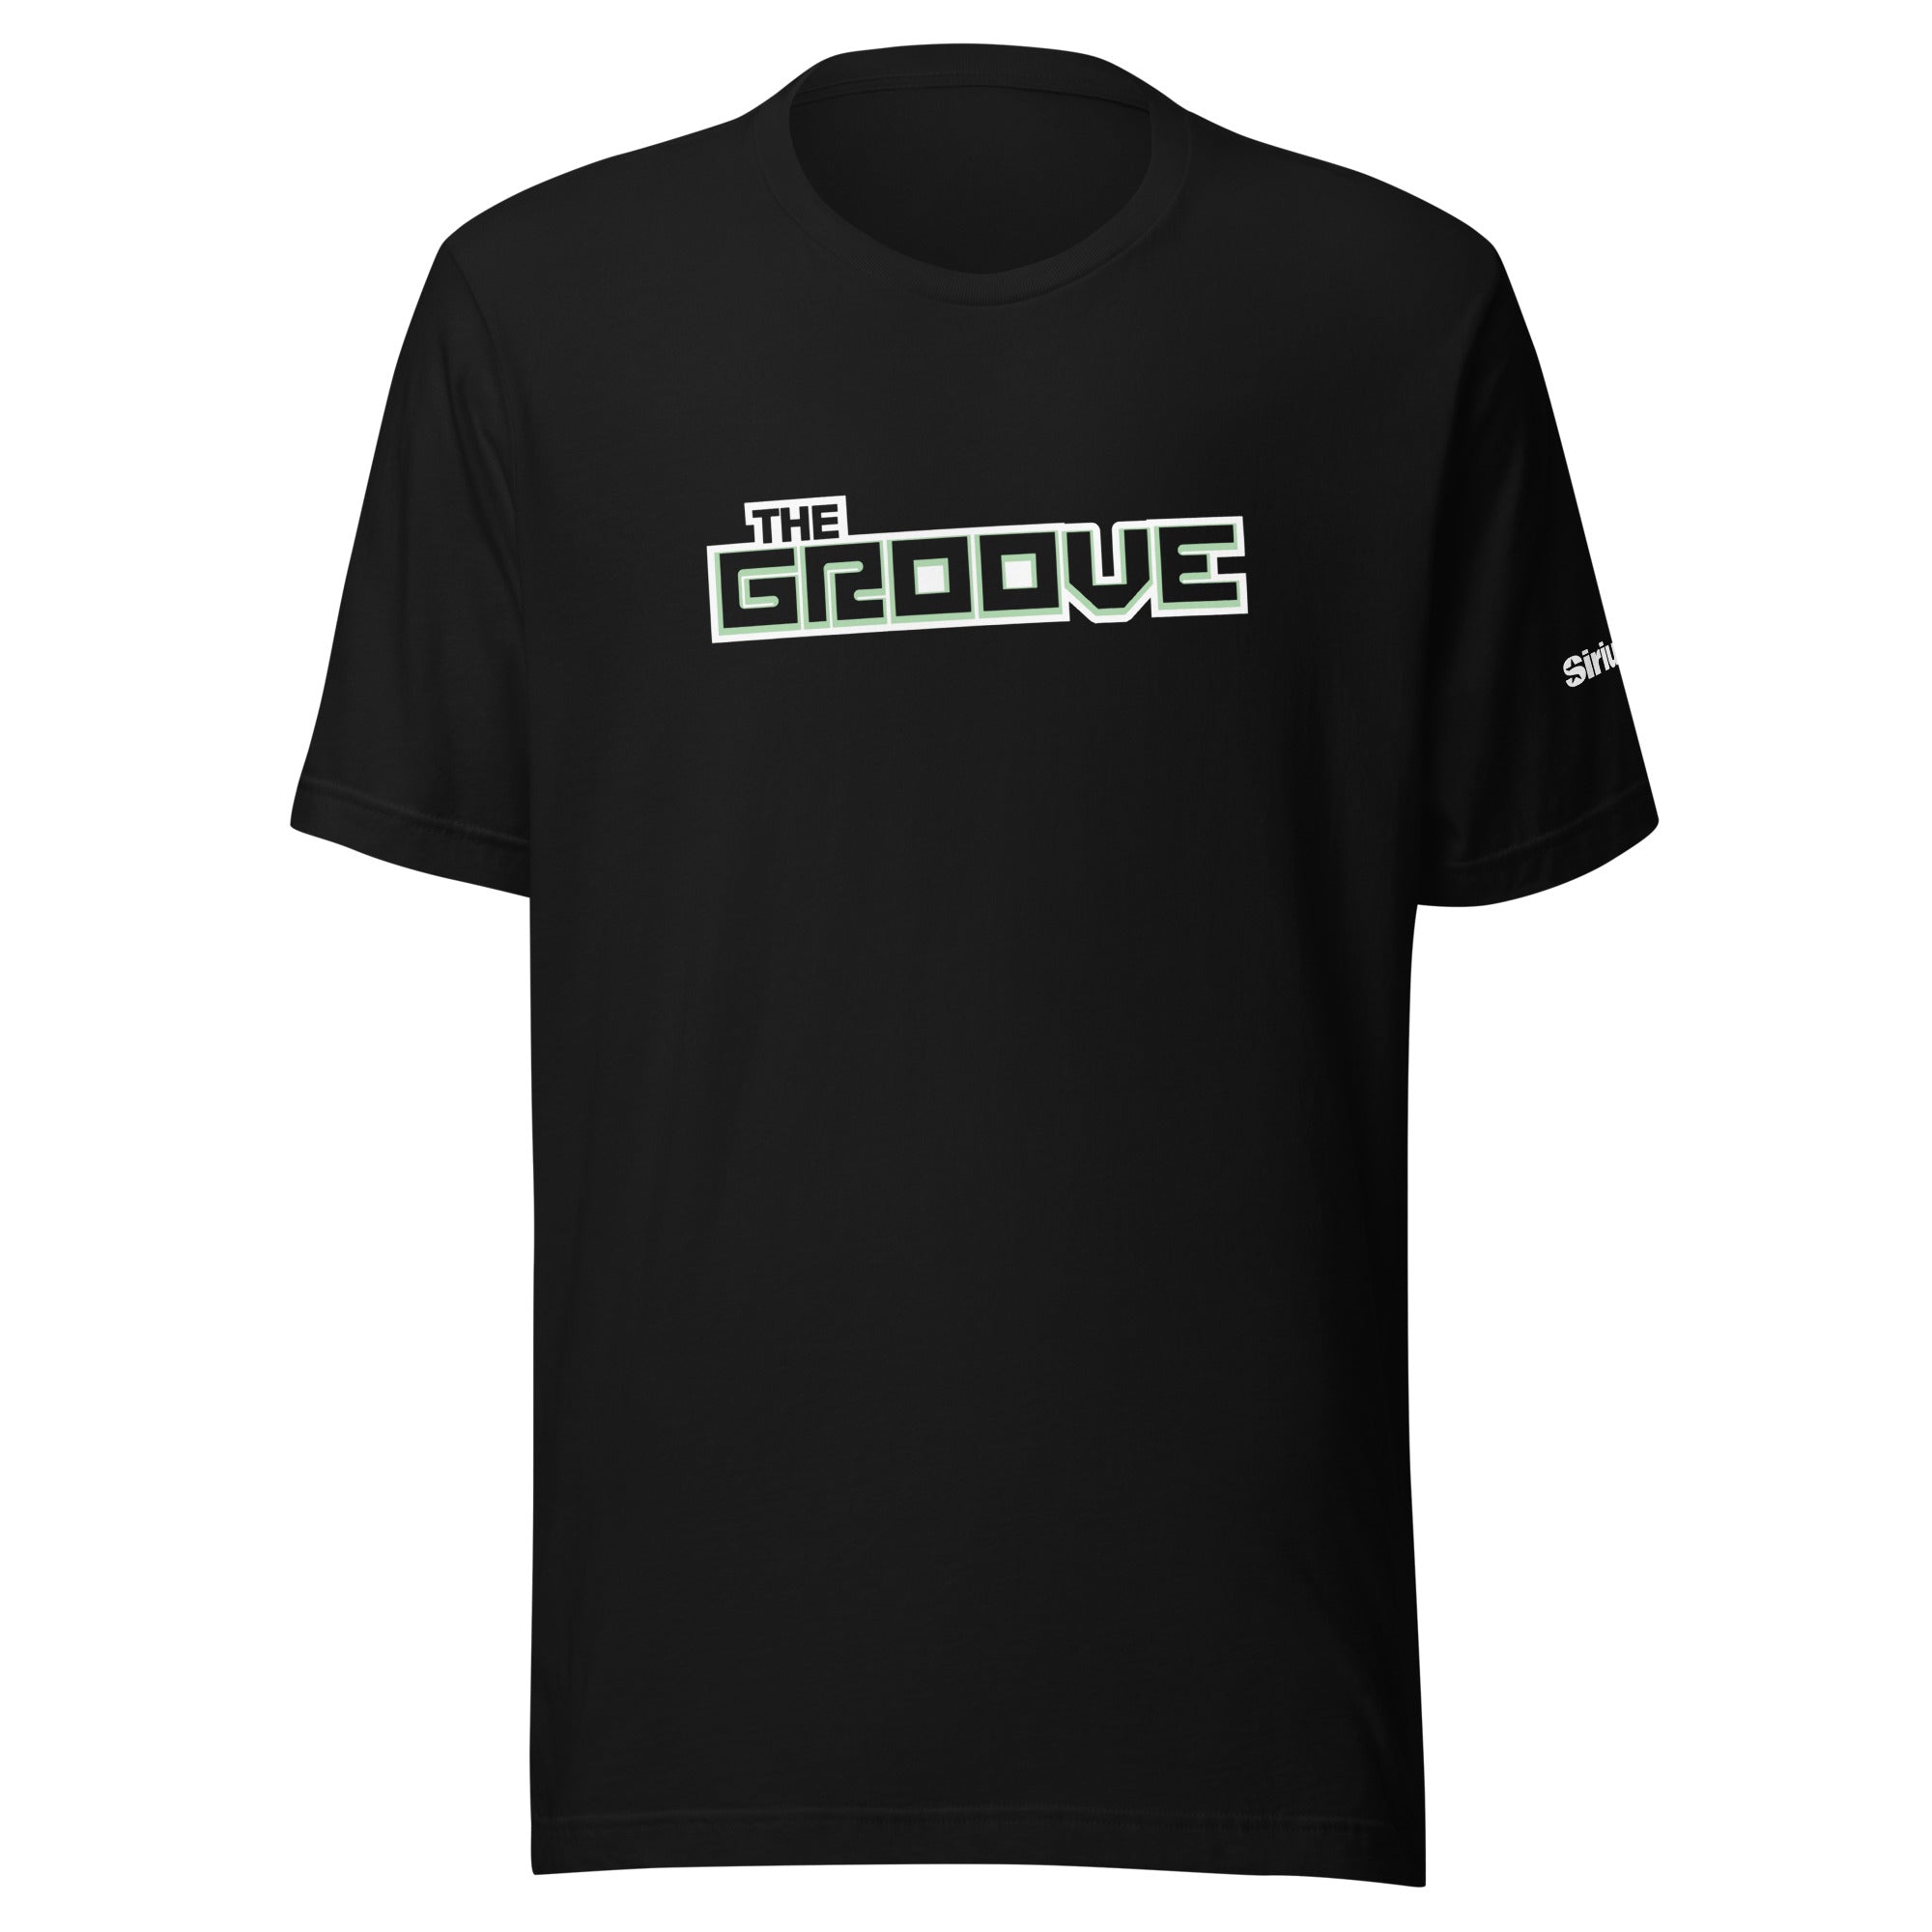 The Groove: T-shirt (Black)